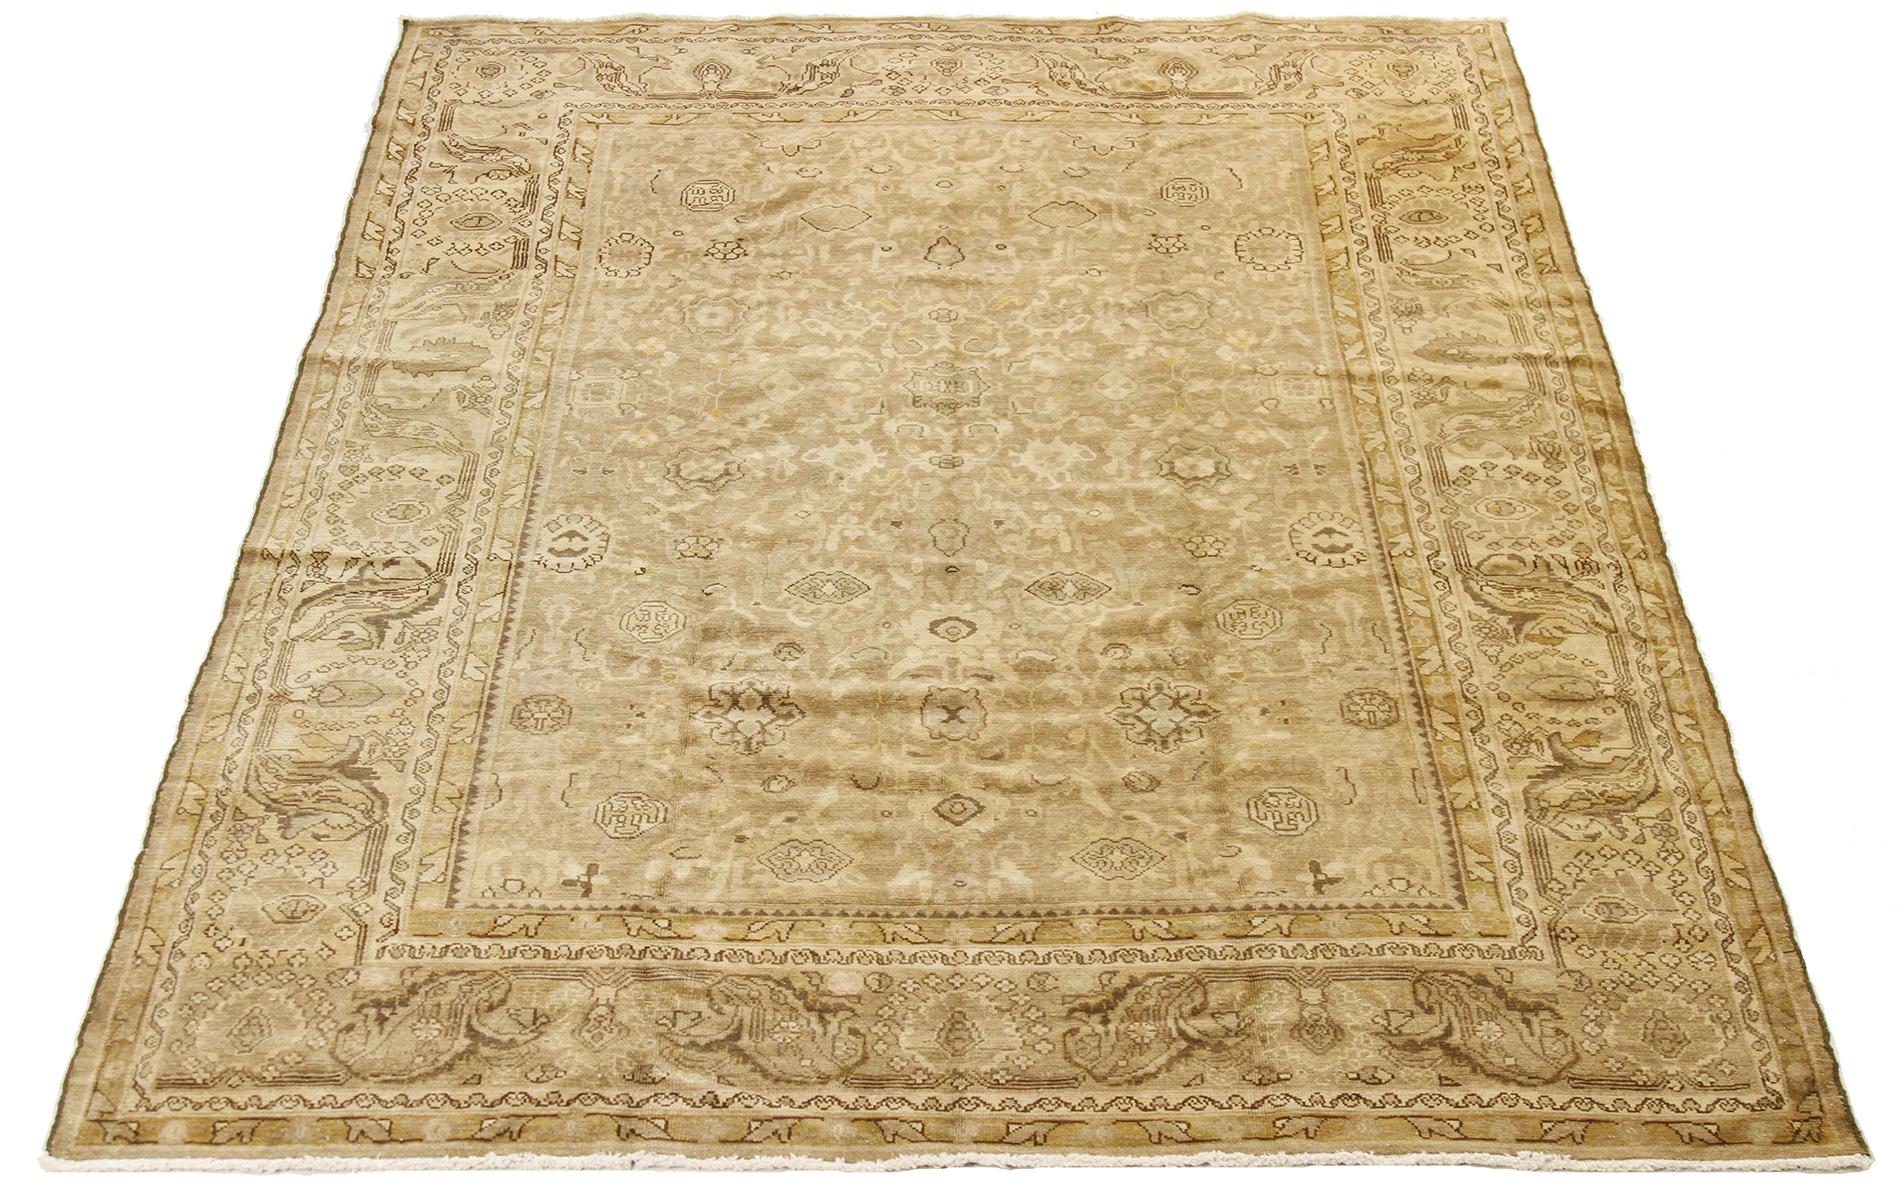 Antique Persian rug handwoven from the finest sheep’s wool and colored with all-natural vegetable dyes that are safe for humans and pets. It’s a traditional Malayer design featuring brown and beige floral details all over its ivory field. It’s a